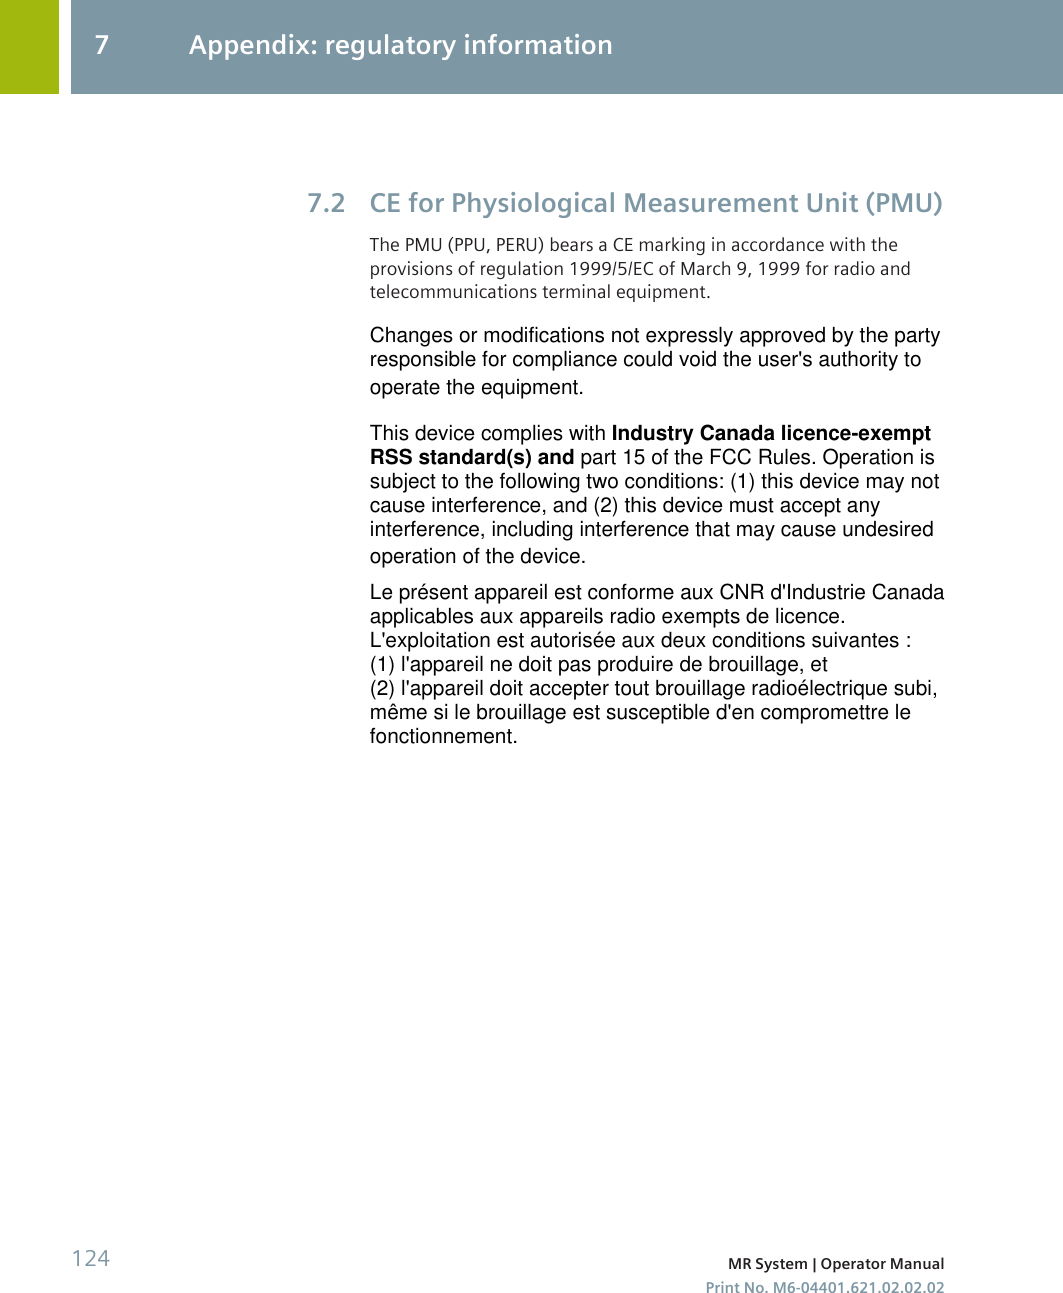 CE for Physiological Measurement Unit (PMU)The PMU (PPU, PERU) bears a CE marking in accordance with theprovisions of regulation 1999/5/EC of March 9, 1999 for radio andtelecommunications terminal equipment.7.27 Appendix: regulatory information124 MR System | Operator ManualPrint No. M6-04401.621.02.02.02Changes or modifications not expressly approved by the partyresponsible for compliance could void the user&apos;s authority tooperate the equipment.This device complies with Industry Canada licence-exemptRSS standard(s) and part 15 of the FCC Rules. Operation issubject to the following two conditions: (1) this device may notcause interference, and (2) this device must accept anyinterference, including interference that may cause undesiredoperation of the device.Le présent appareil est conforme aux CNR d&apos;Industrie Canadaapplicables aux appareils radio exempts de licence.L&apos;exploitation est autorisée aux deux conditions suivantes :(1) l&apos;appareil ne doit pas produire de brouillage, et(2) l&apos;appareil doit accepter tout brouillage radioélectrique subi,même si le brouillage est susceptible d&apos;en compromettre lefonctionnement.